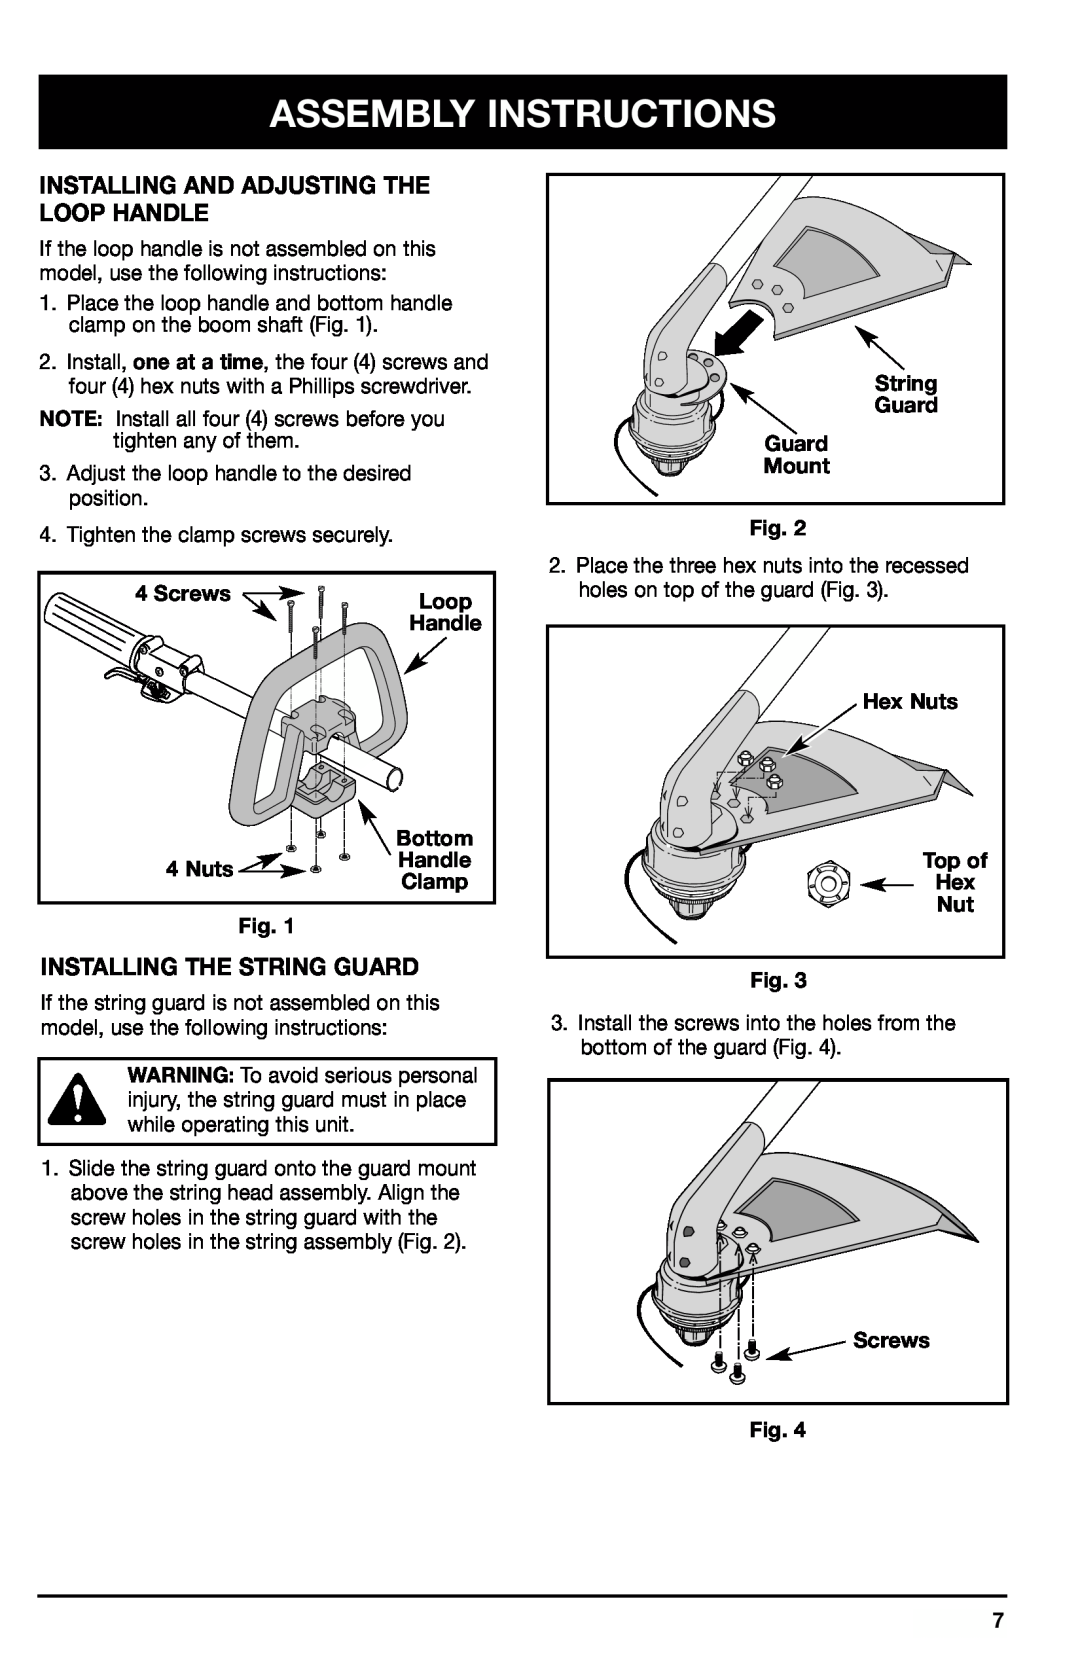 Ryobi 2075r Assembly Instructions, Installing And Adjusting The Loop Handle, Installing The String Guard, Screws, Nuts 